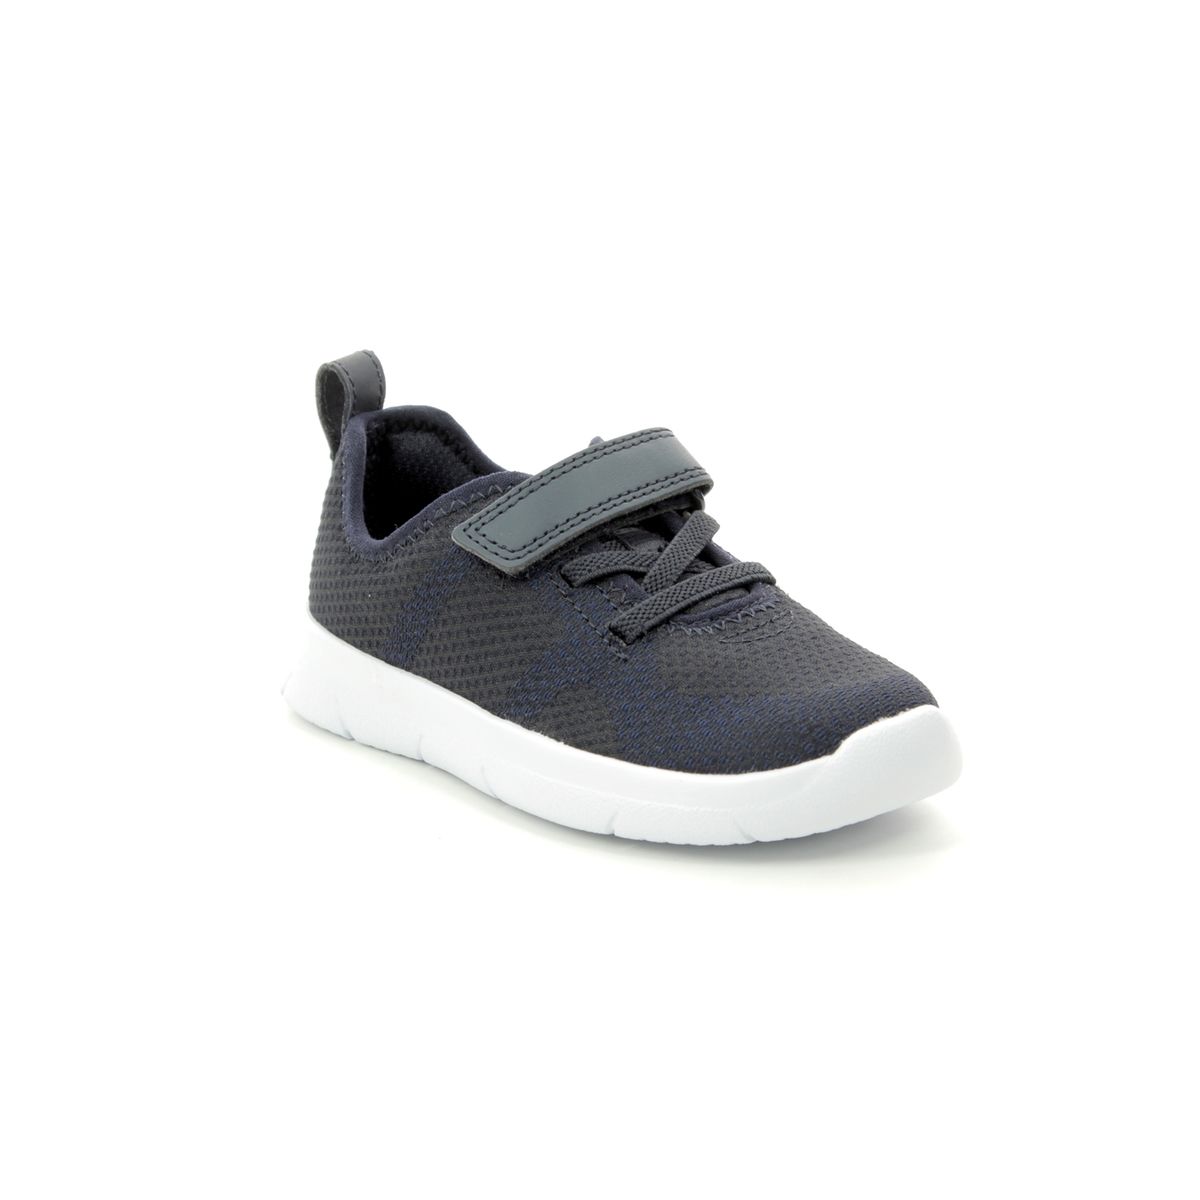 Clarks Ath Flux T Navy Kids Toddler Boys Trainers 4126-97G in a Plain Textile in Size 9.5